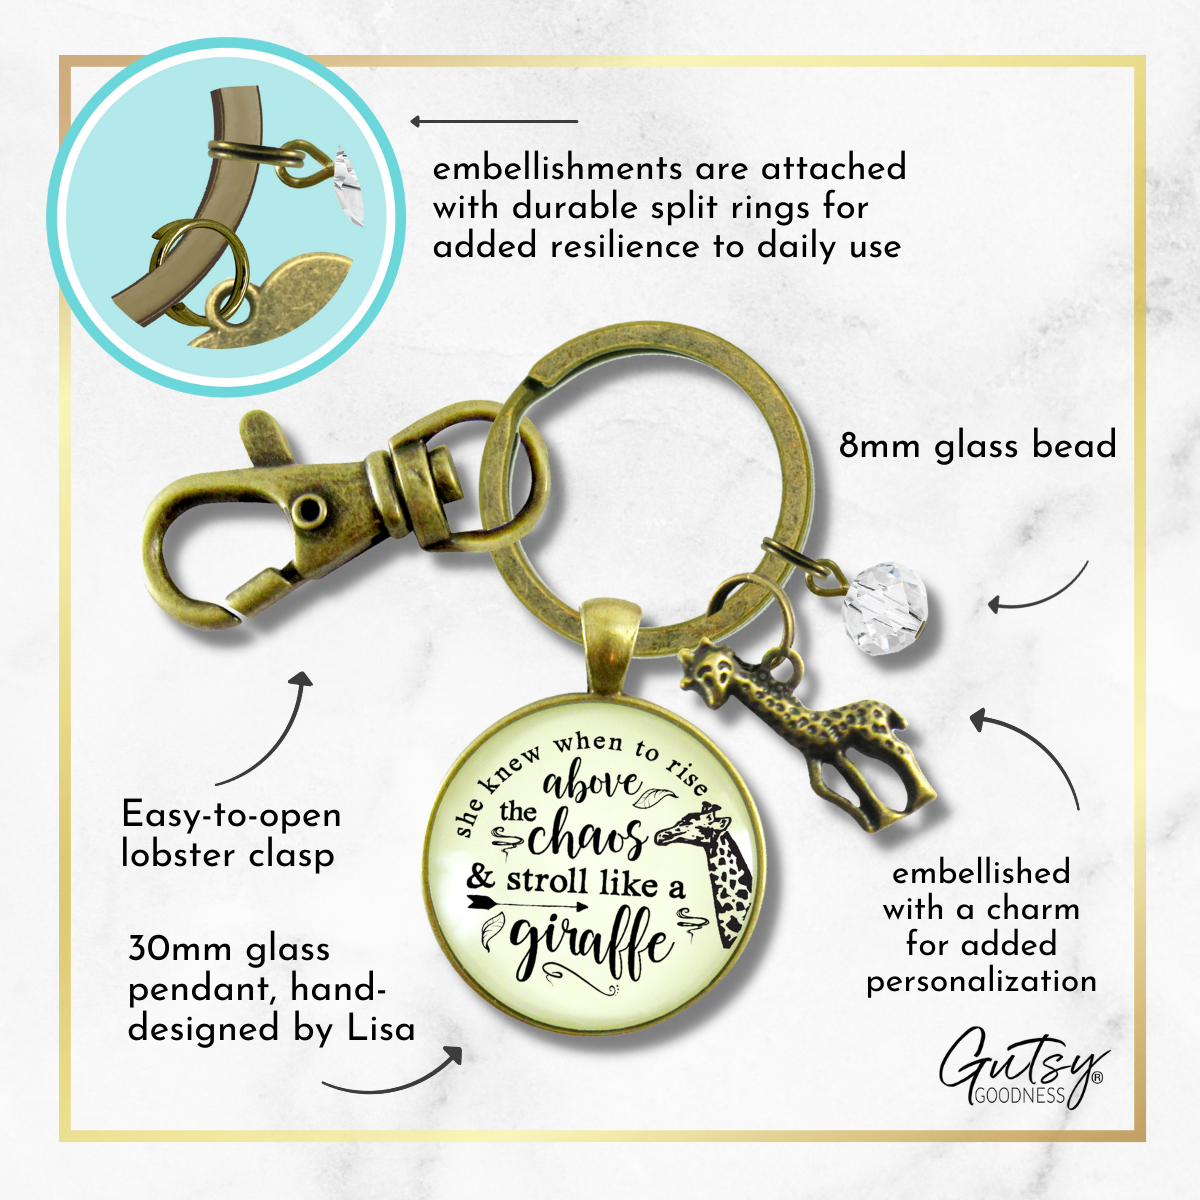 Giraffe Keychain She Knew When To Rise Above The Chaos Boho Pendant Friendship Jewelry Charm - Gutsy Goodness Handmade Jewelry;Giraffe Keychain She Knew When To Rise Above The Chaos Boho Pendant Friendship Jewelry Charm - Gutsy Goodness Handmade Jewelry Gifts